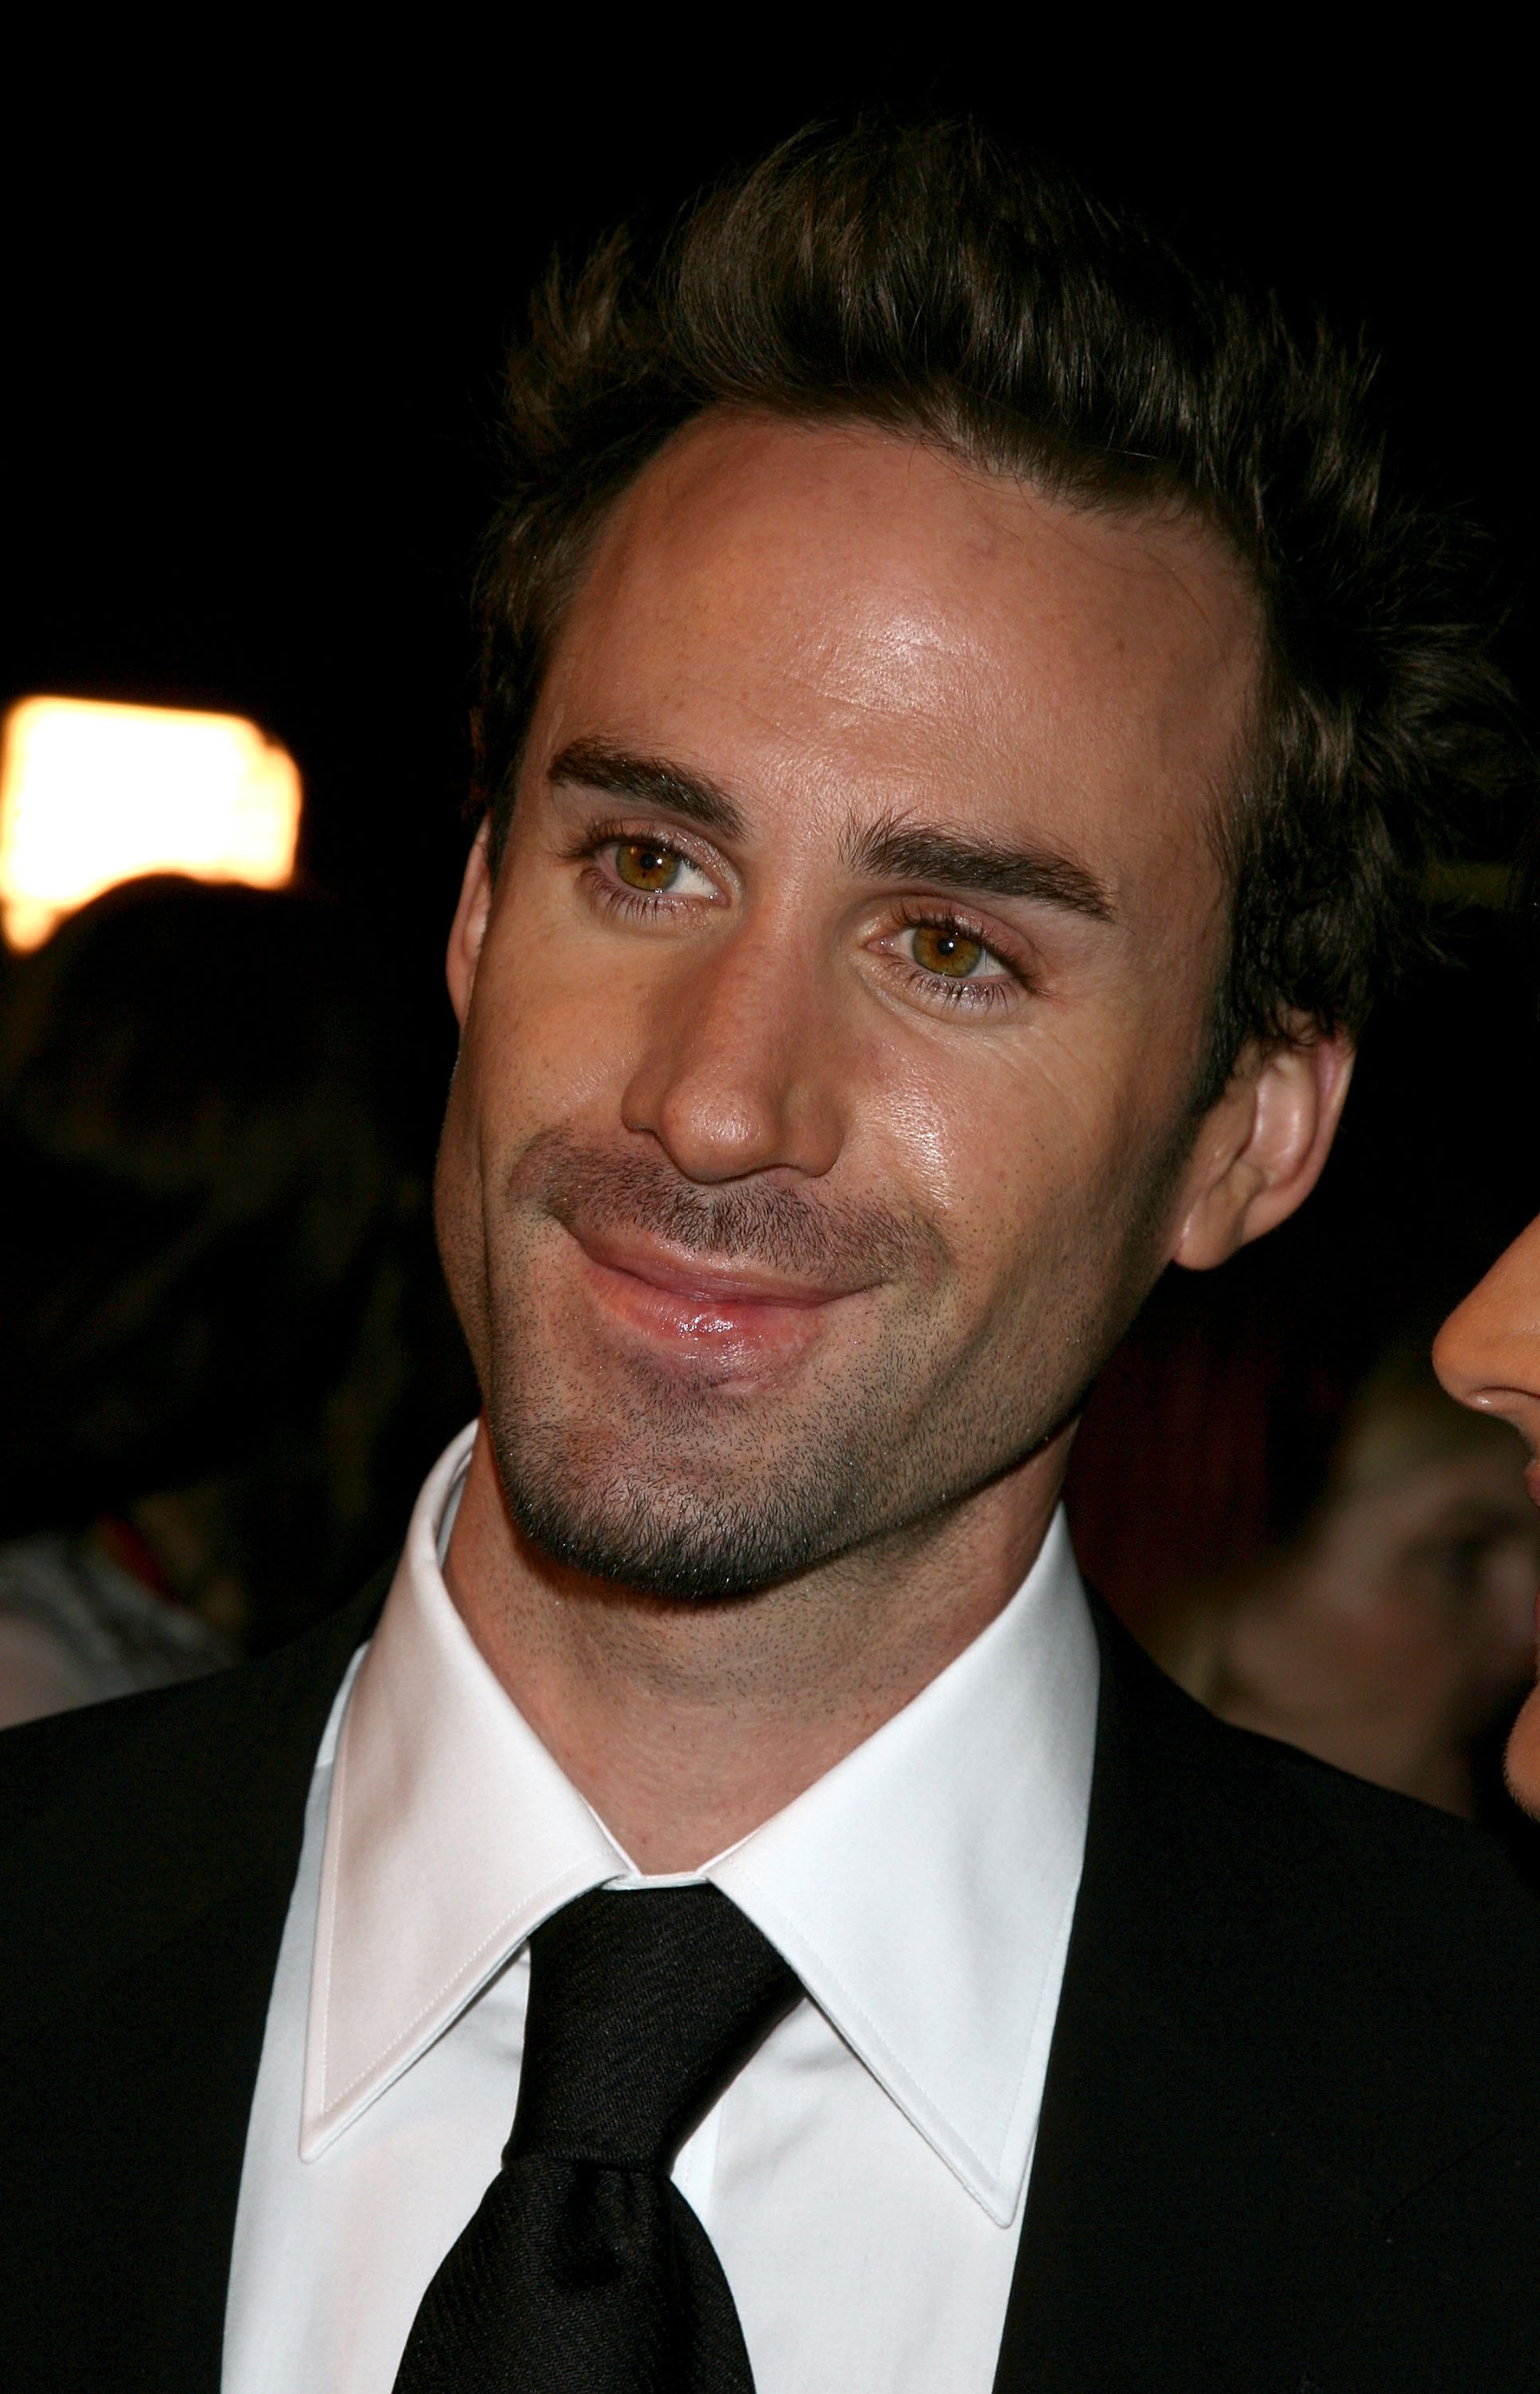 Joseph Fiennes is pictured as he arrives at the world premiere of Tristar Picture's "Running With Scissors" at the Academy of Motion Picture Arts & Sciences October 10, 2006, in Beverly Hills, California | Source: Getty Images